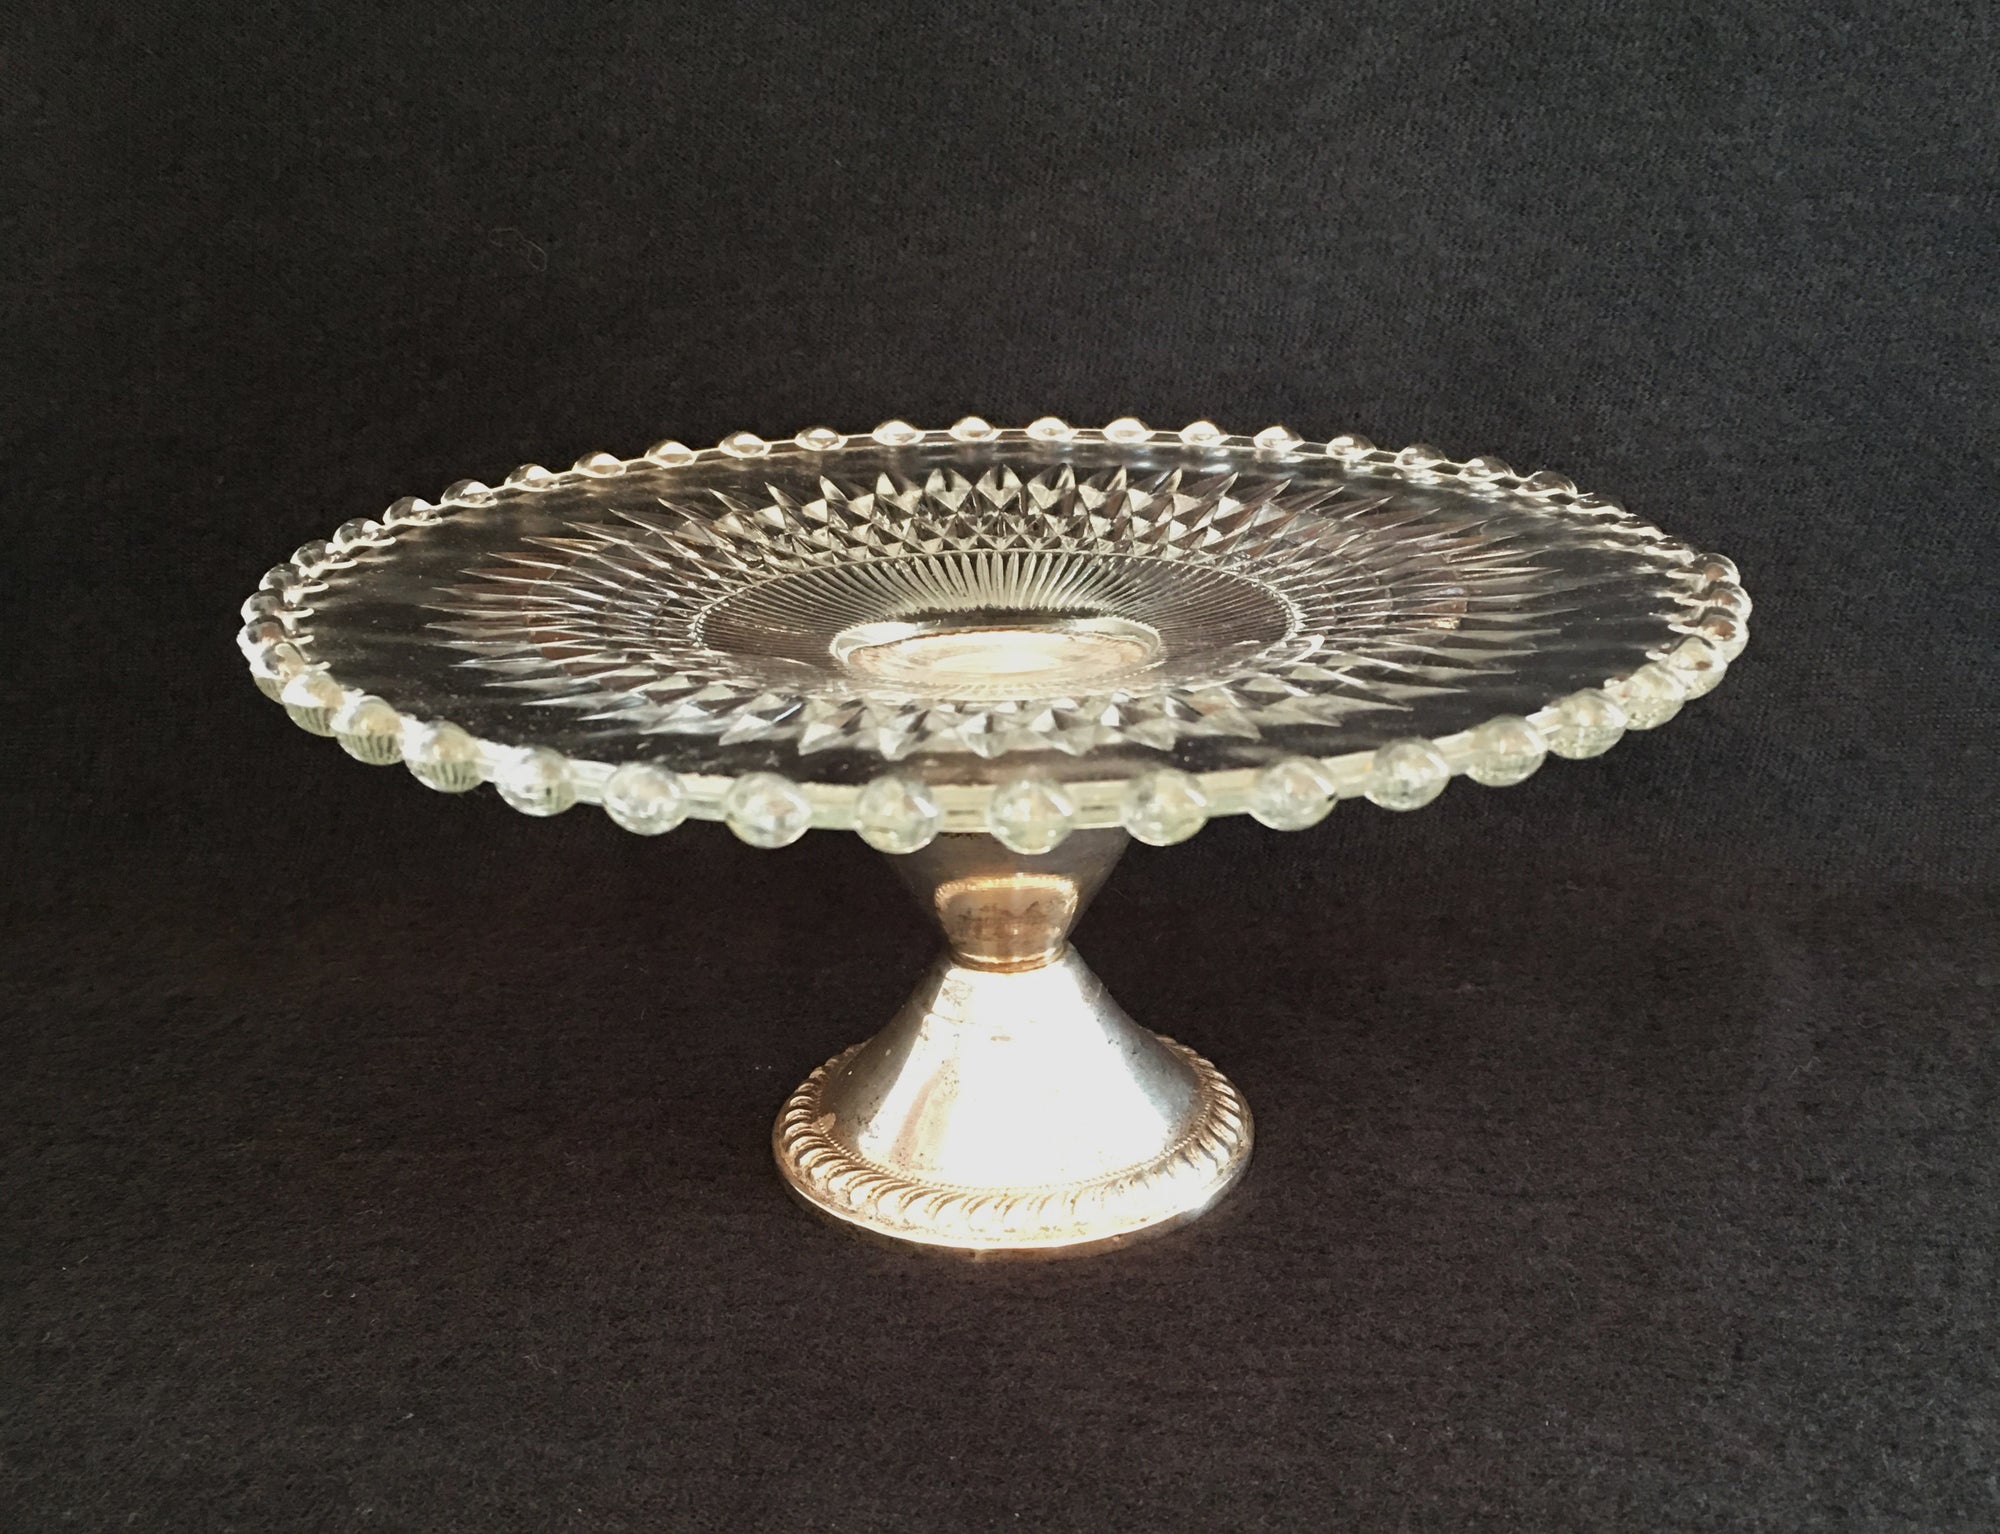 Early 1900s Cake/Cookie Stand, Cut Glass with Sterling Silver Weighted Base Marked “Dughin Creation”